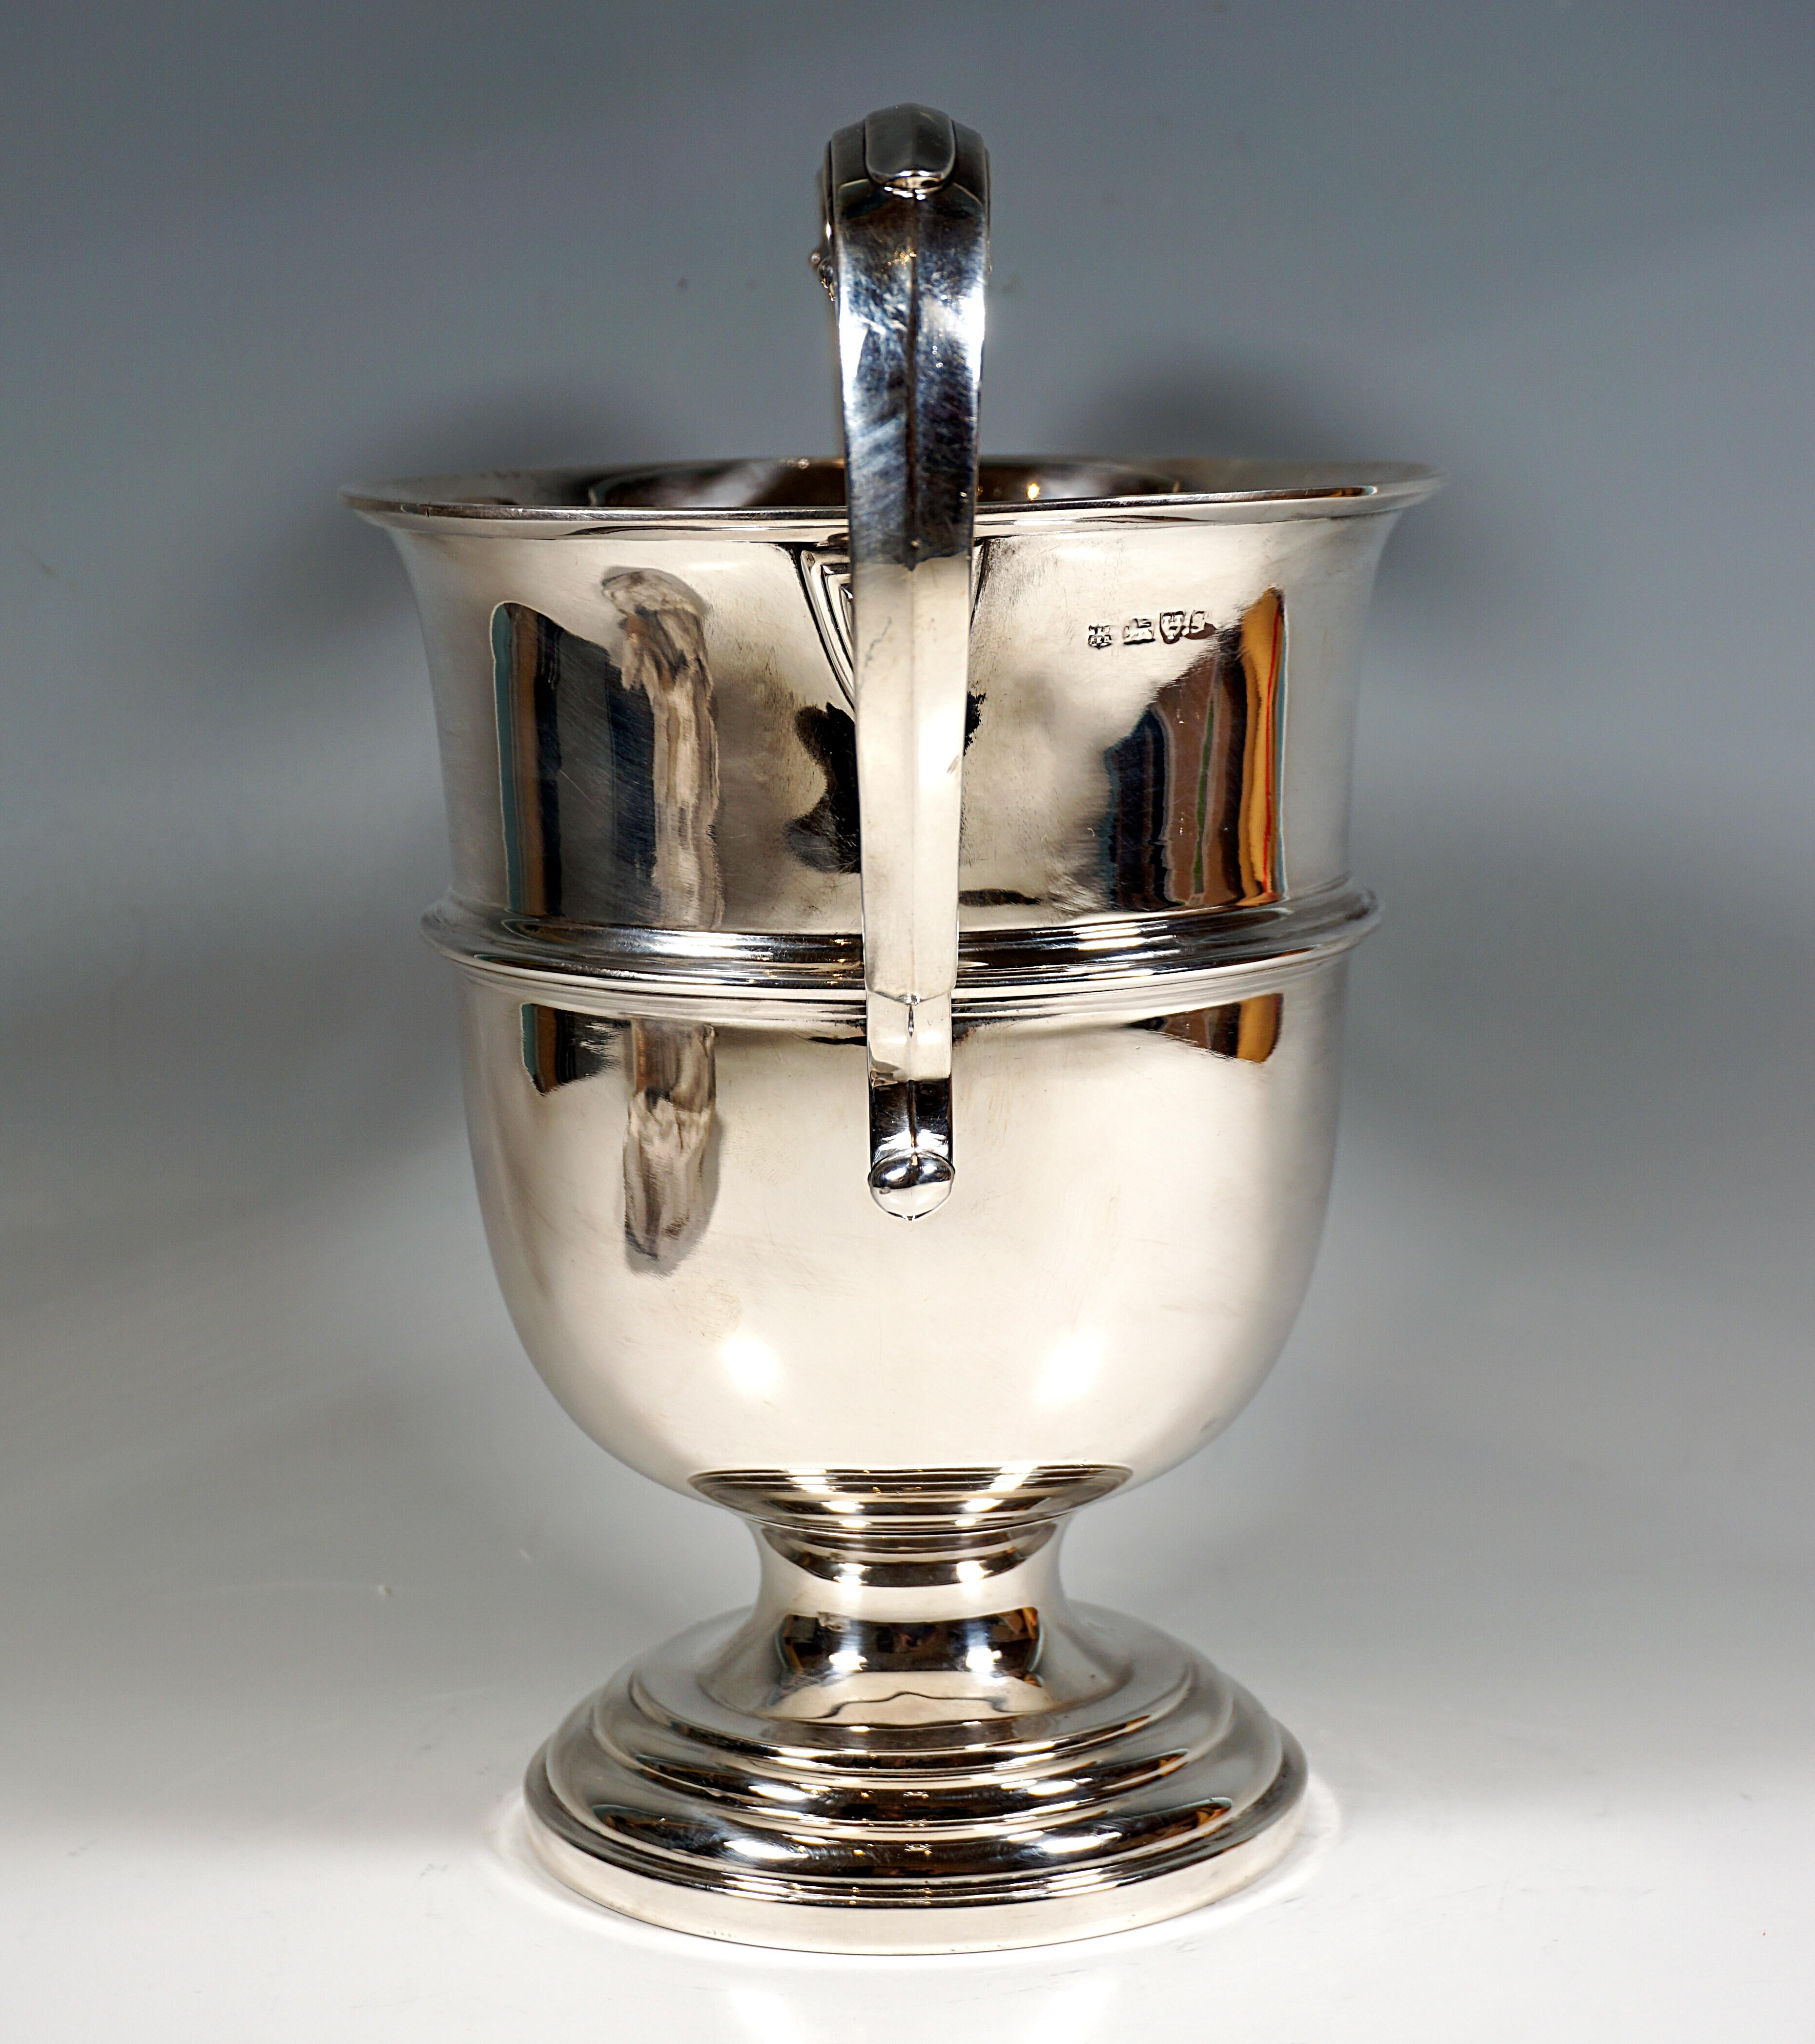 Elegant crater-shaped silver wine cooler on an offset, stepped, round base with smooth, profiled walls and two large, raised volute-shaped handles.

925 Silver

Hallmarks:
Master's sign 'MEB FEB'- Barker Brothers, registered 1906
Coat of arms